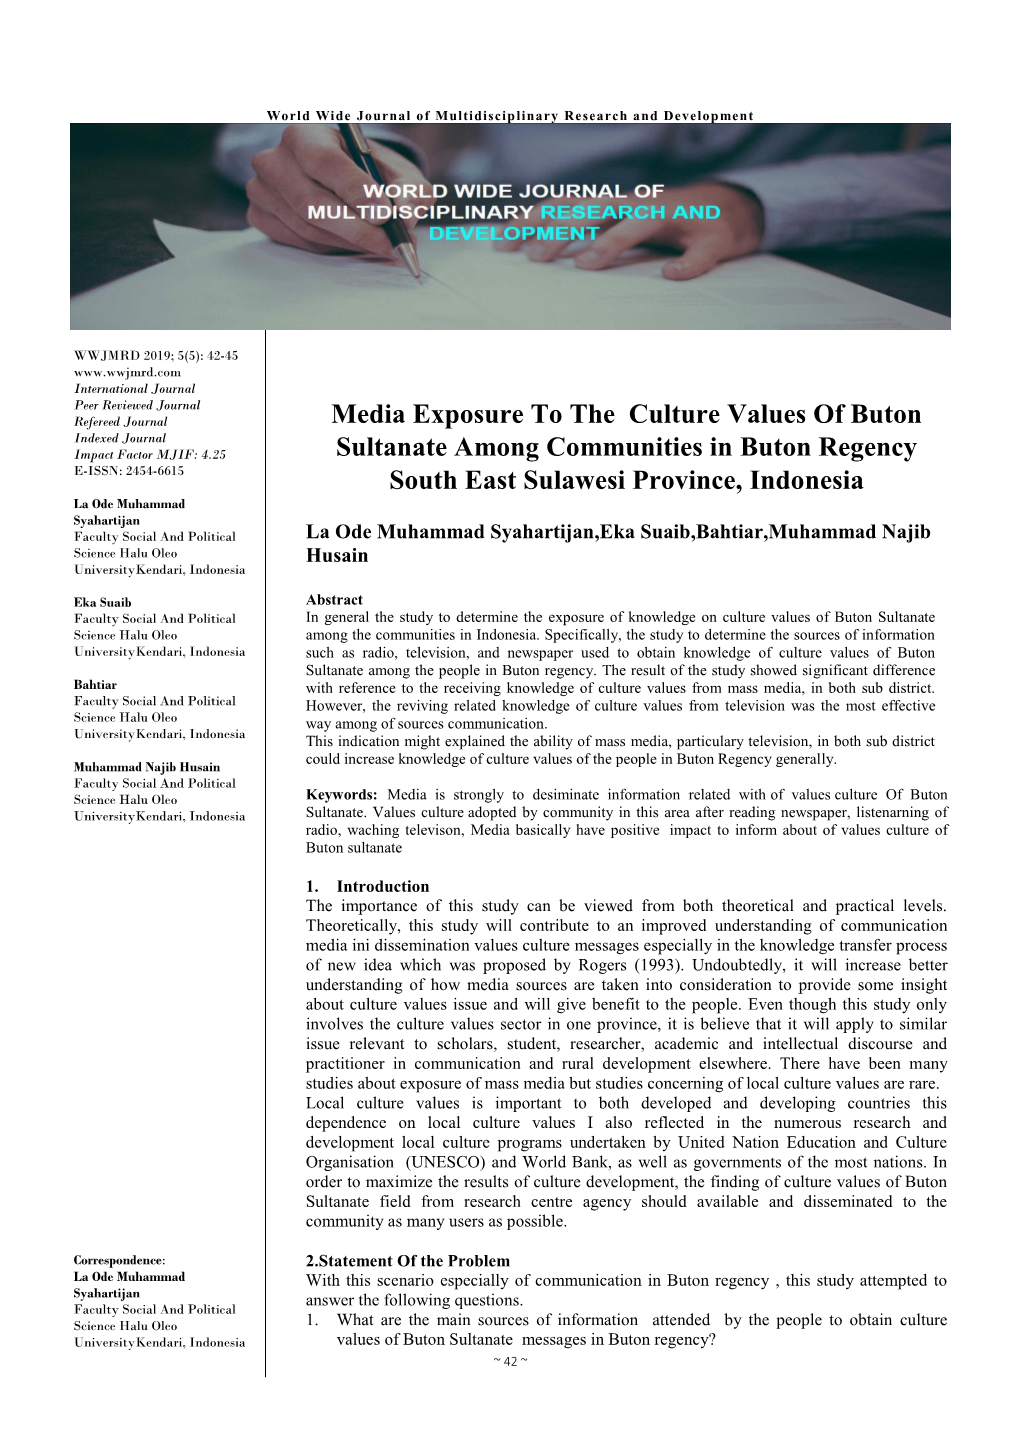 Media Exposure to the Culture Values of Buton Sultanate Among